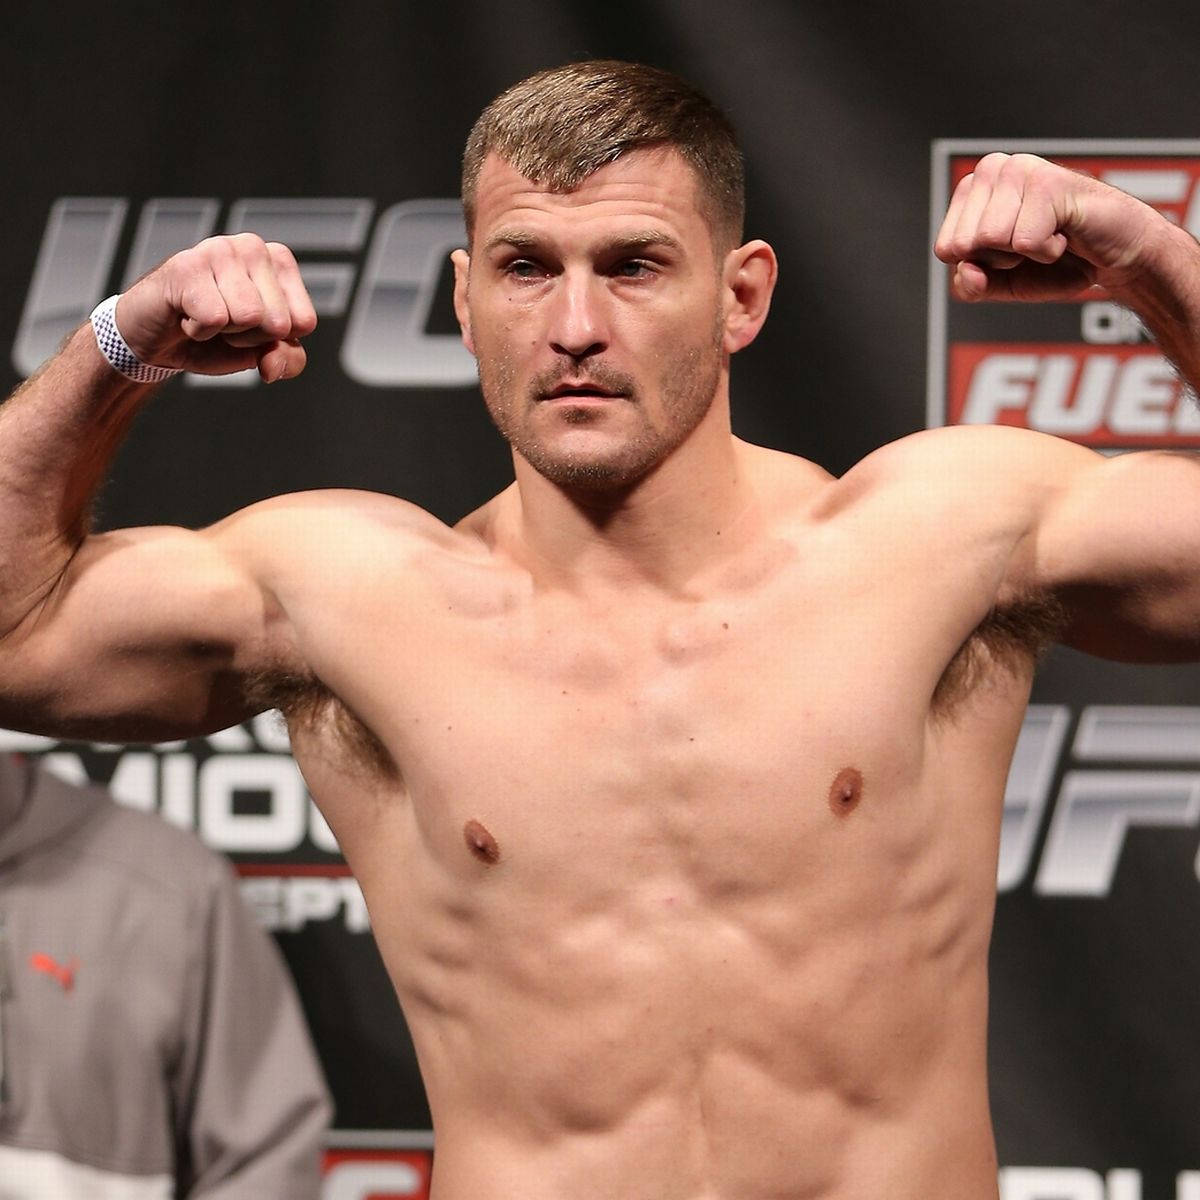 Stipe Miocic Flexing During Weigh-In Wallpaper